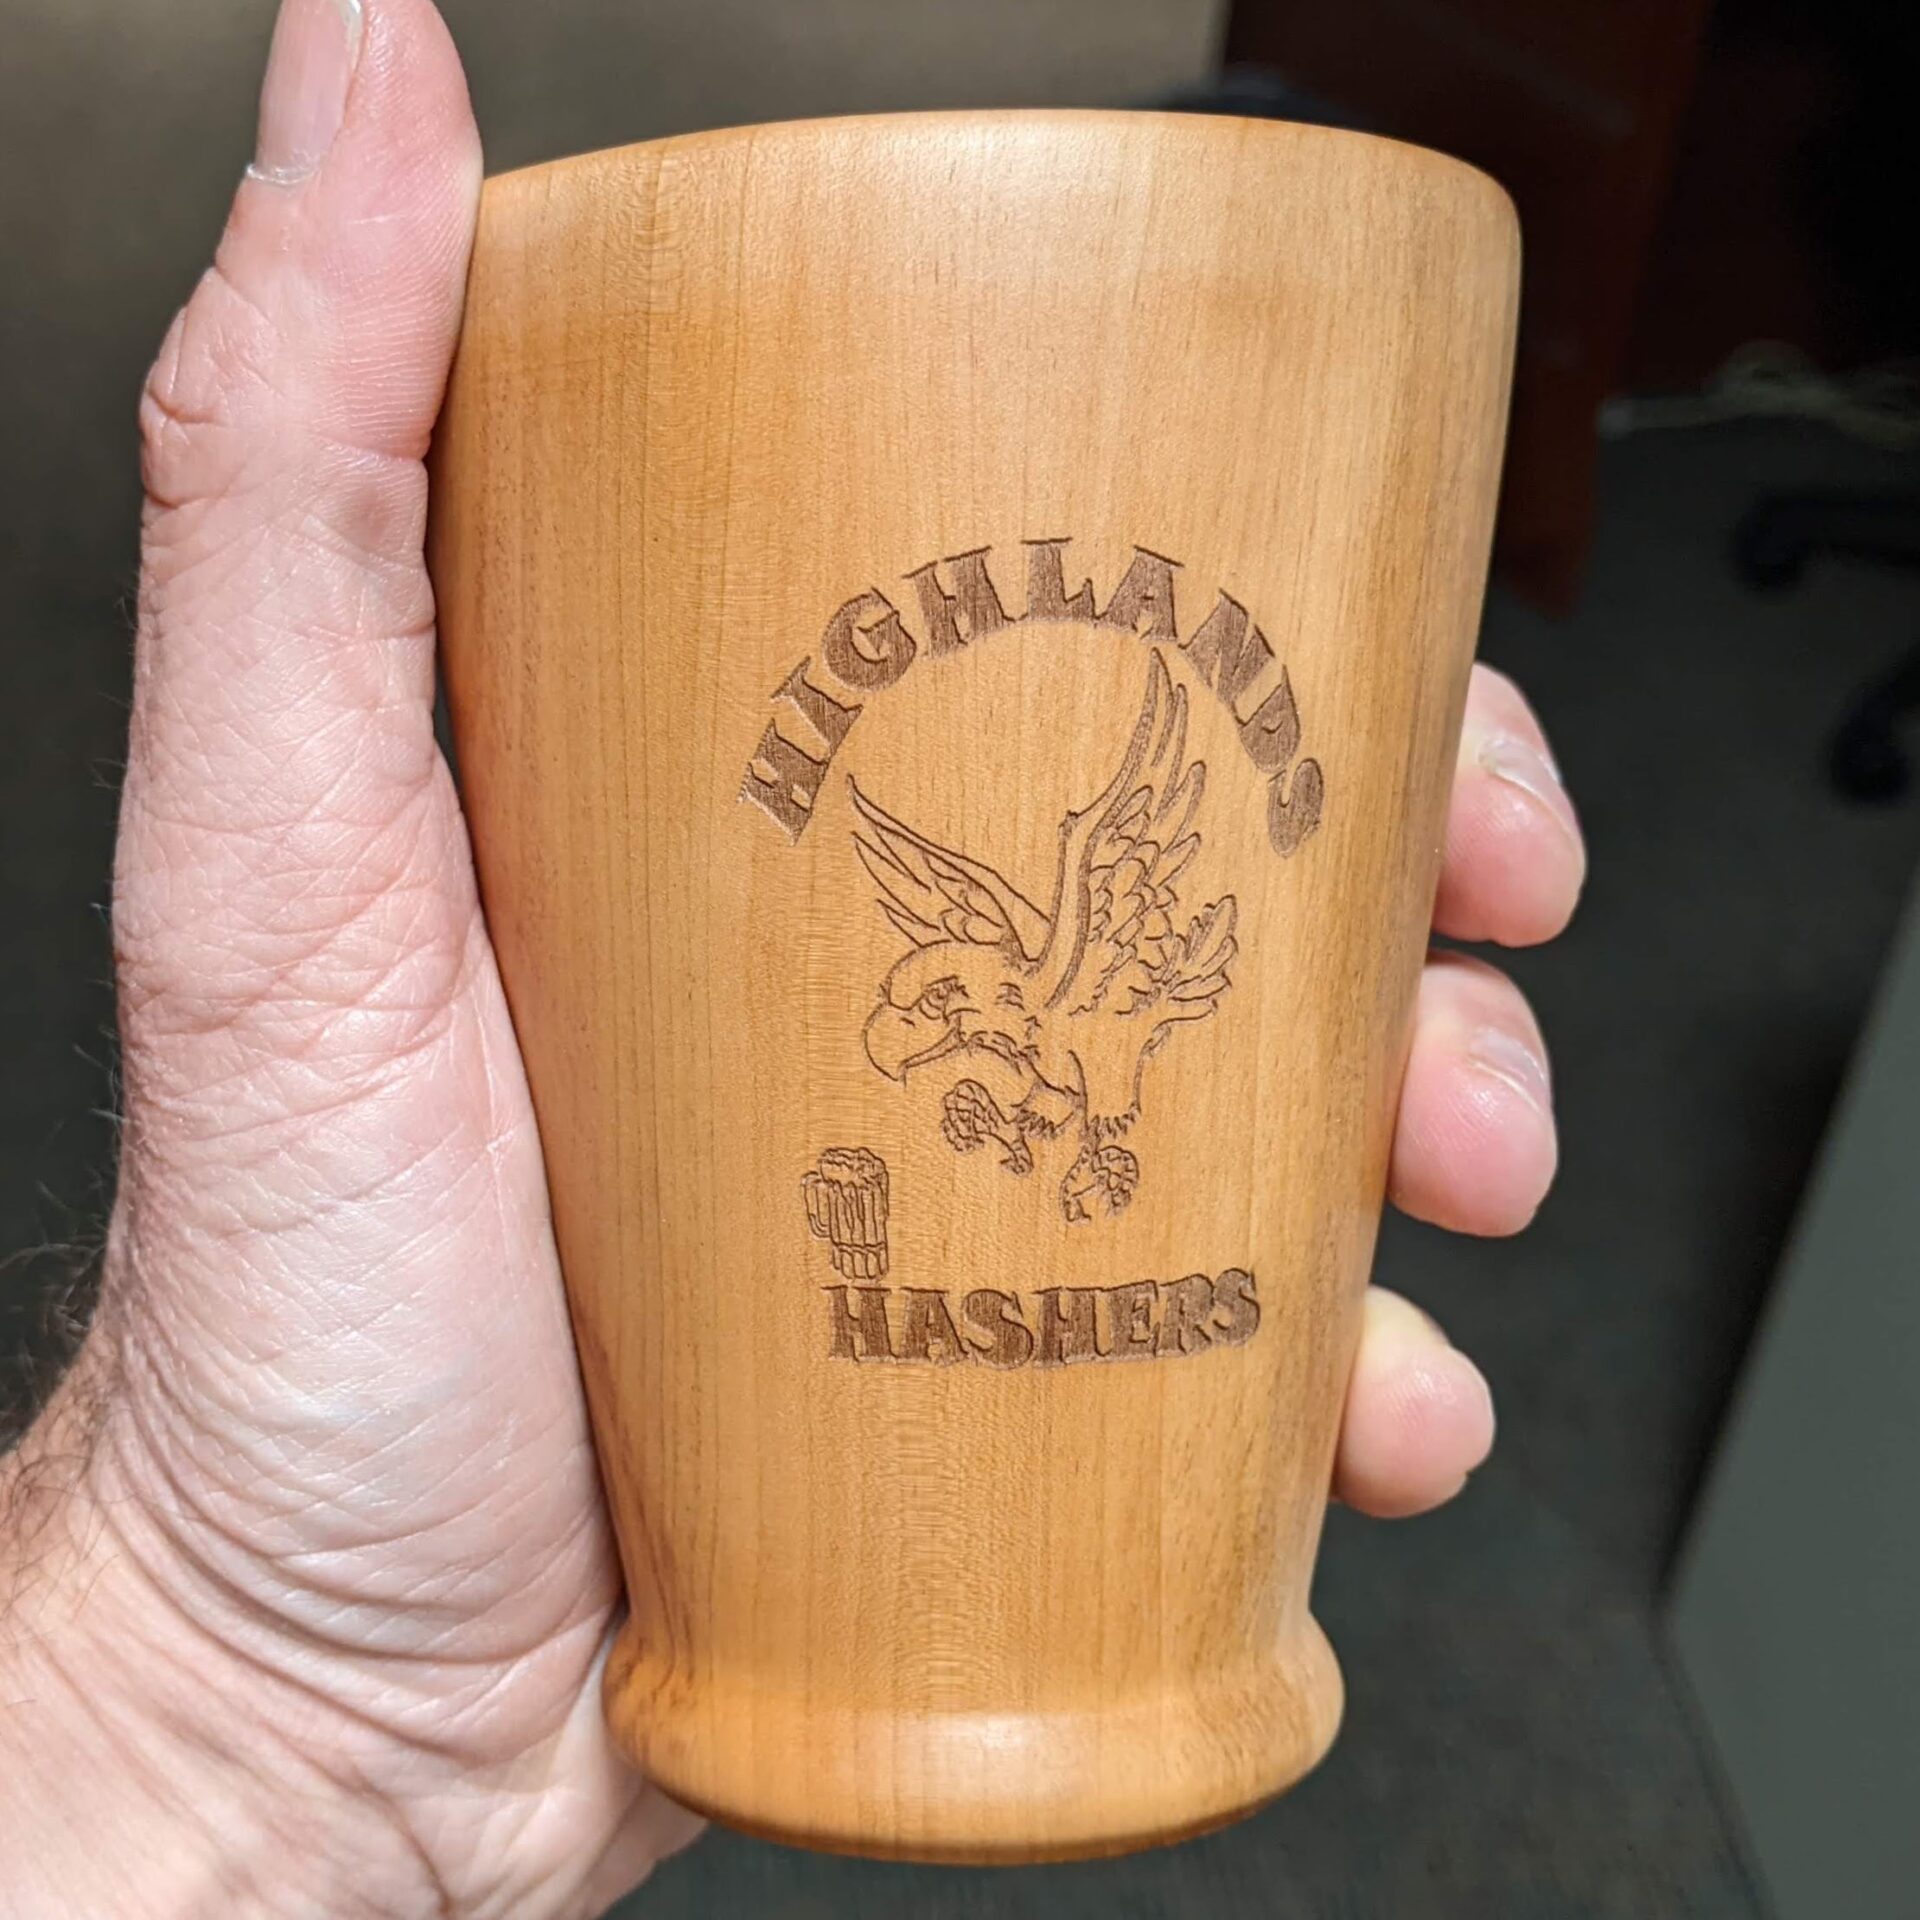 The Highlands Hashers Challenge Chalice